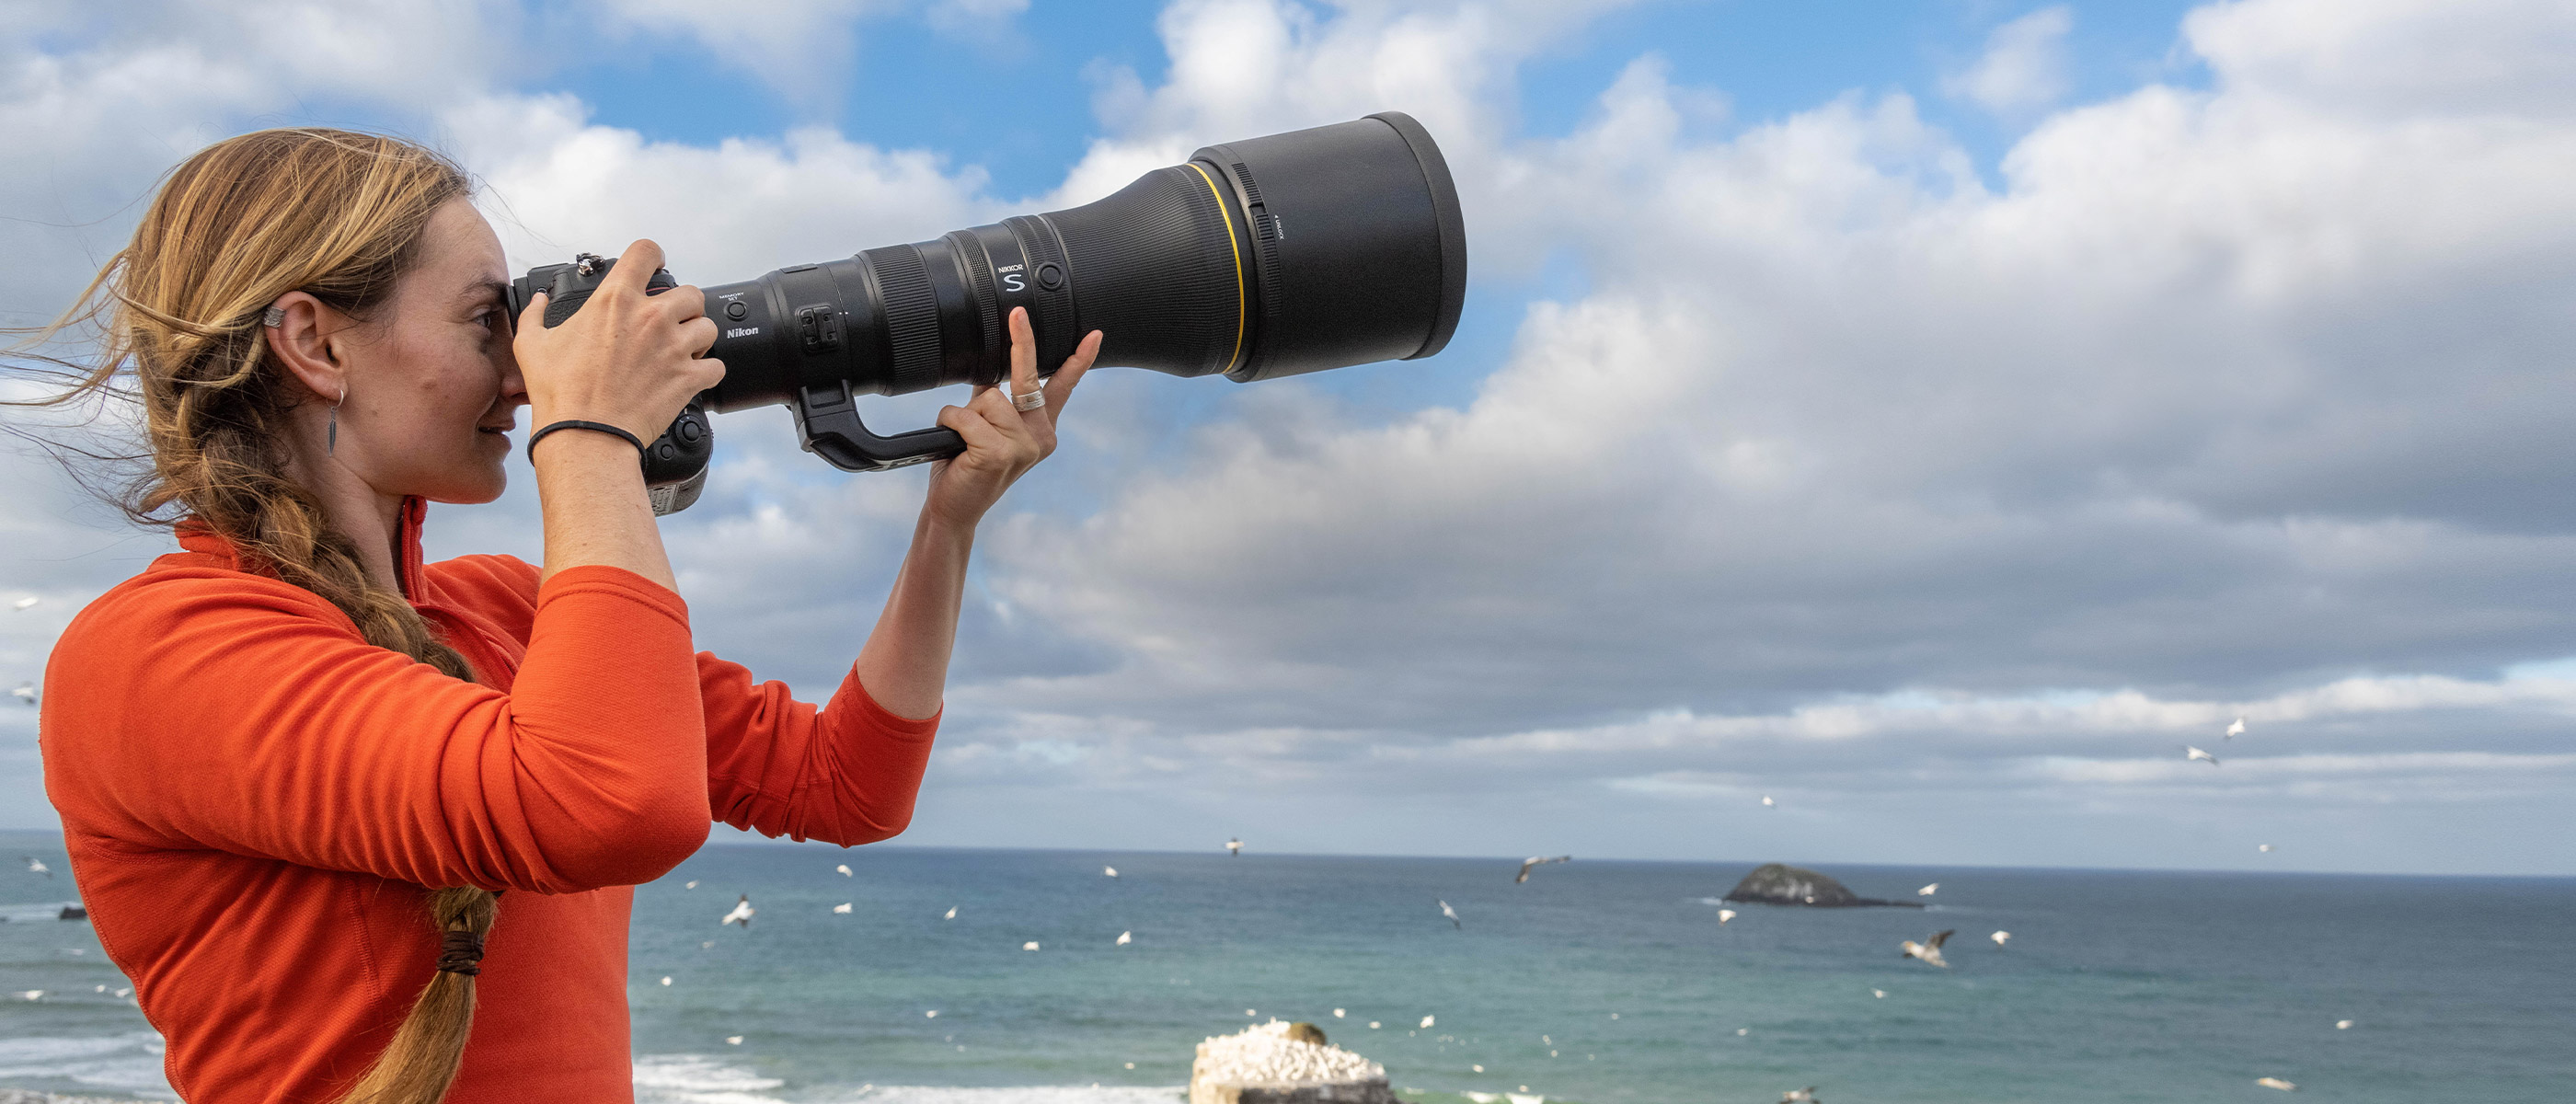 Photo of a woman in an orange shirt holding a Nikon camera with the NIKKOR Z 800mm f/6.3 VR S lens attached photographing birds